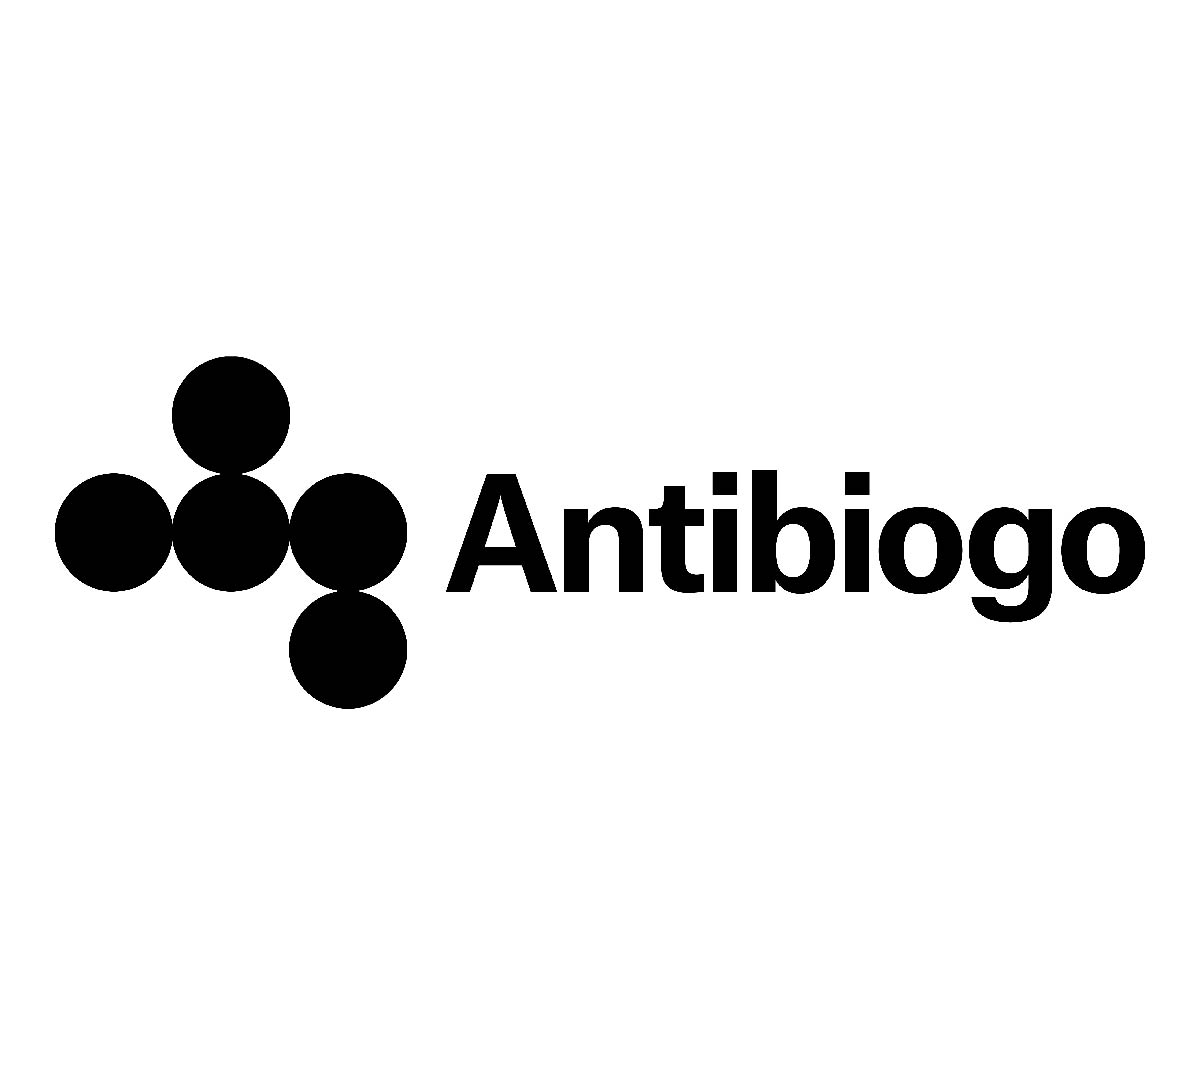 Antibiogo: a revolutionary application developed by Doctors Without Borders